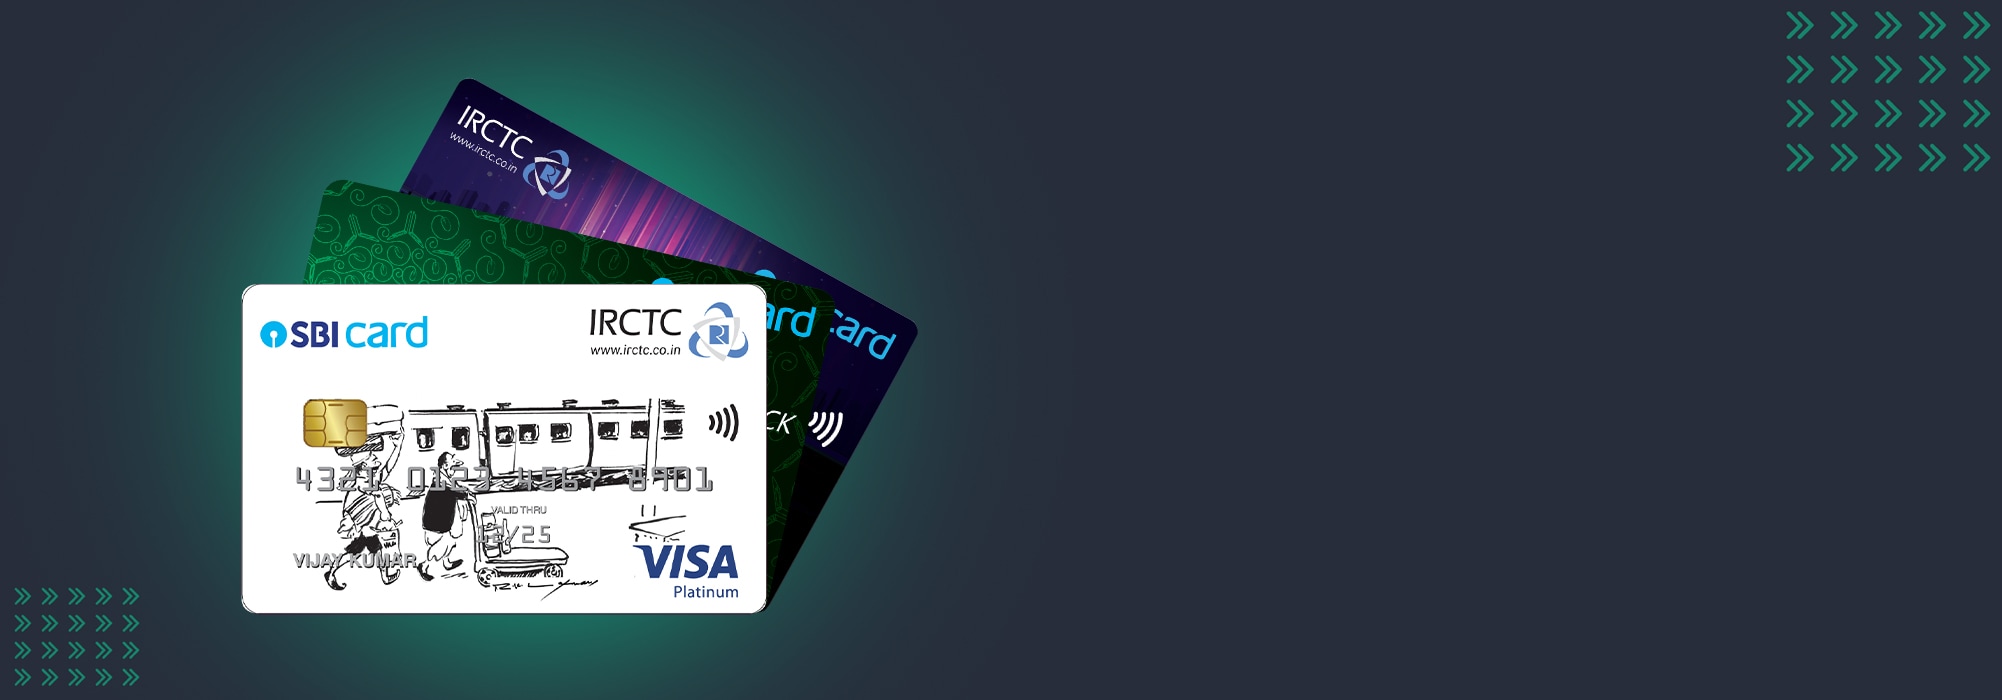 SBI BPCL Credit Card Features